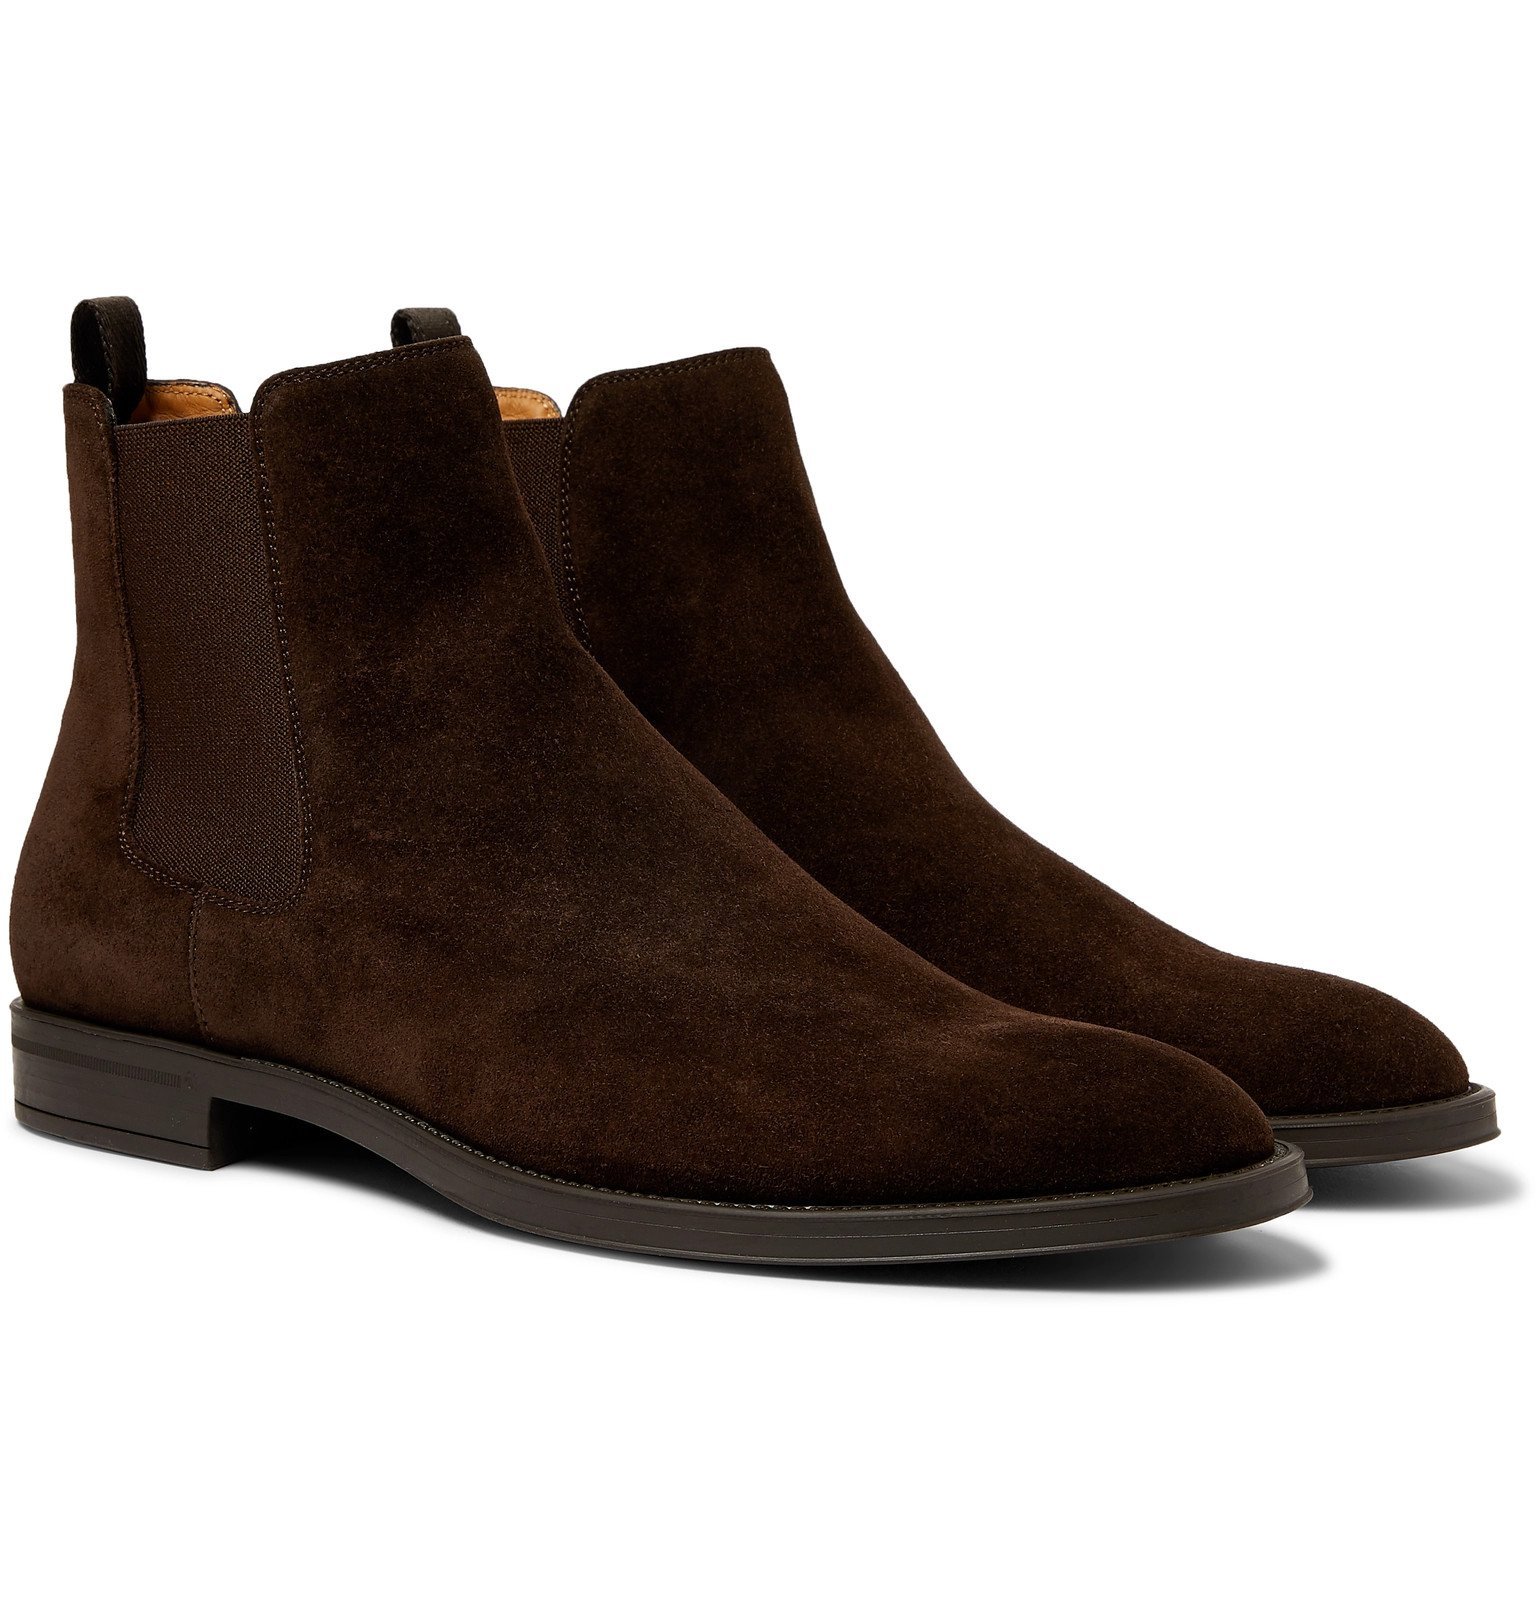 Hugo Boss - Coventry Suede Chelsea Boots - Brown Hugo Boss